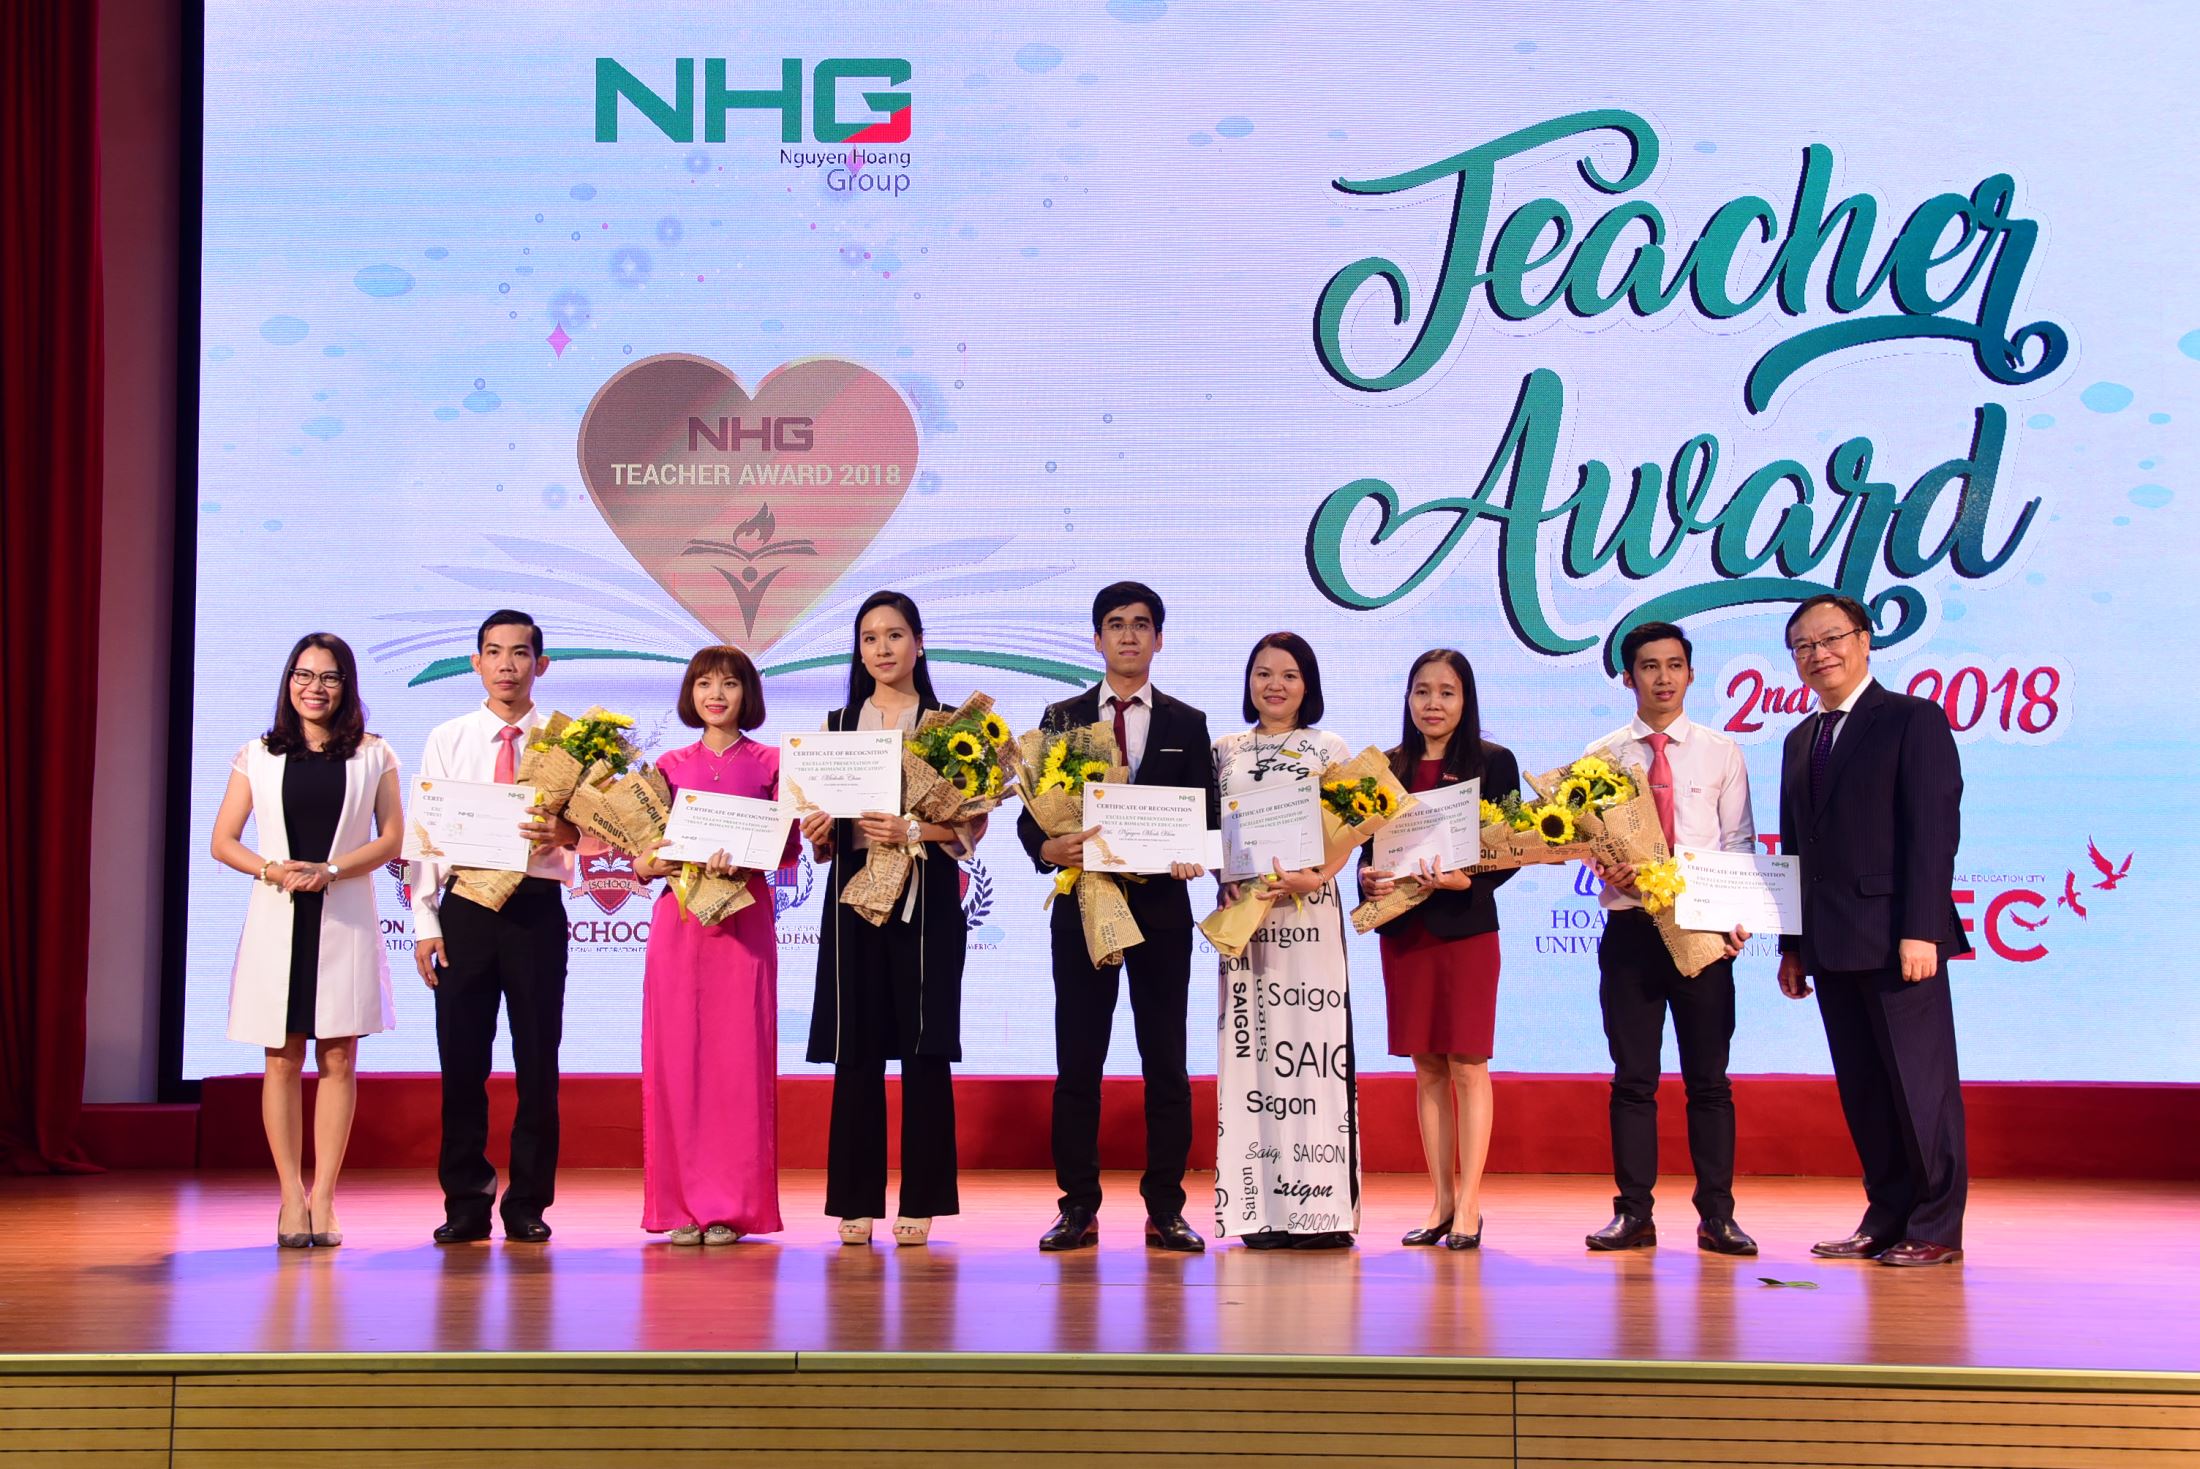 Teachers winning the most excellent presentation about “Trust & Romance in teaching” receive flowers, certificates and gifts from the representatives of NHG